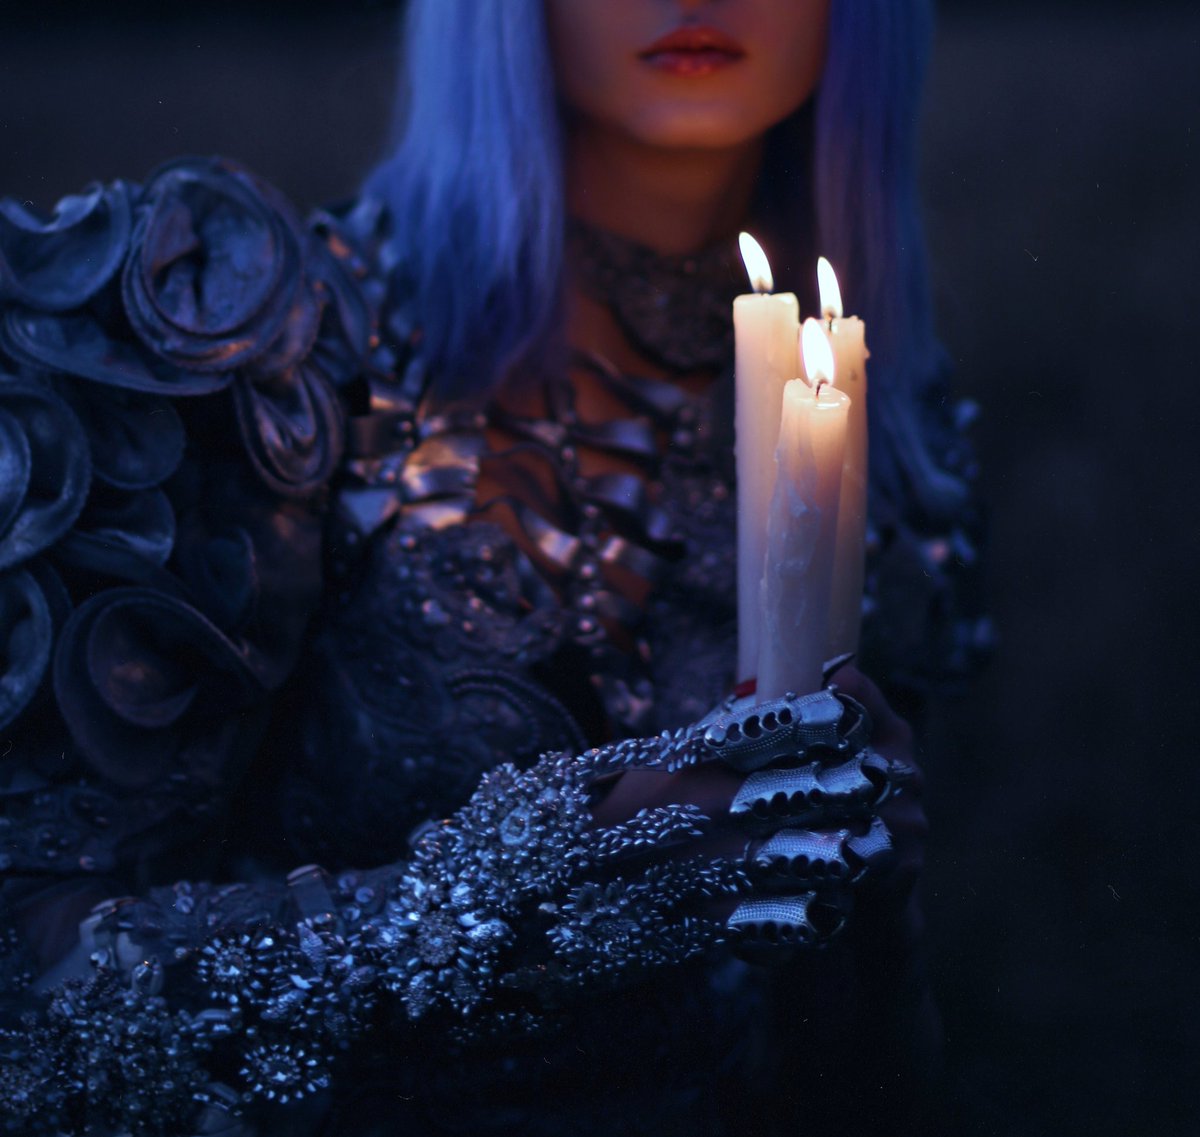 In the cold twilight souls-candles burn.

Model - Vita Montgomery.
Natalie Ina Photography.
October 2021.

#witchcraft #witchyaesthetic #AgnieszkaOsipa #darkphotography #night #atmospheric #emotiveportrait #NatalieIna #natalieinaphotography